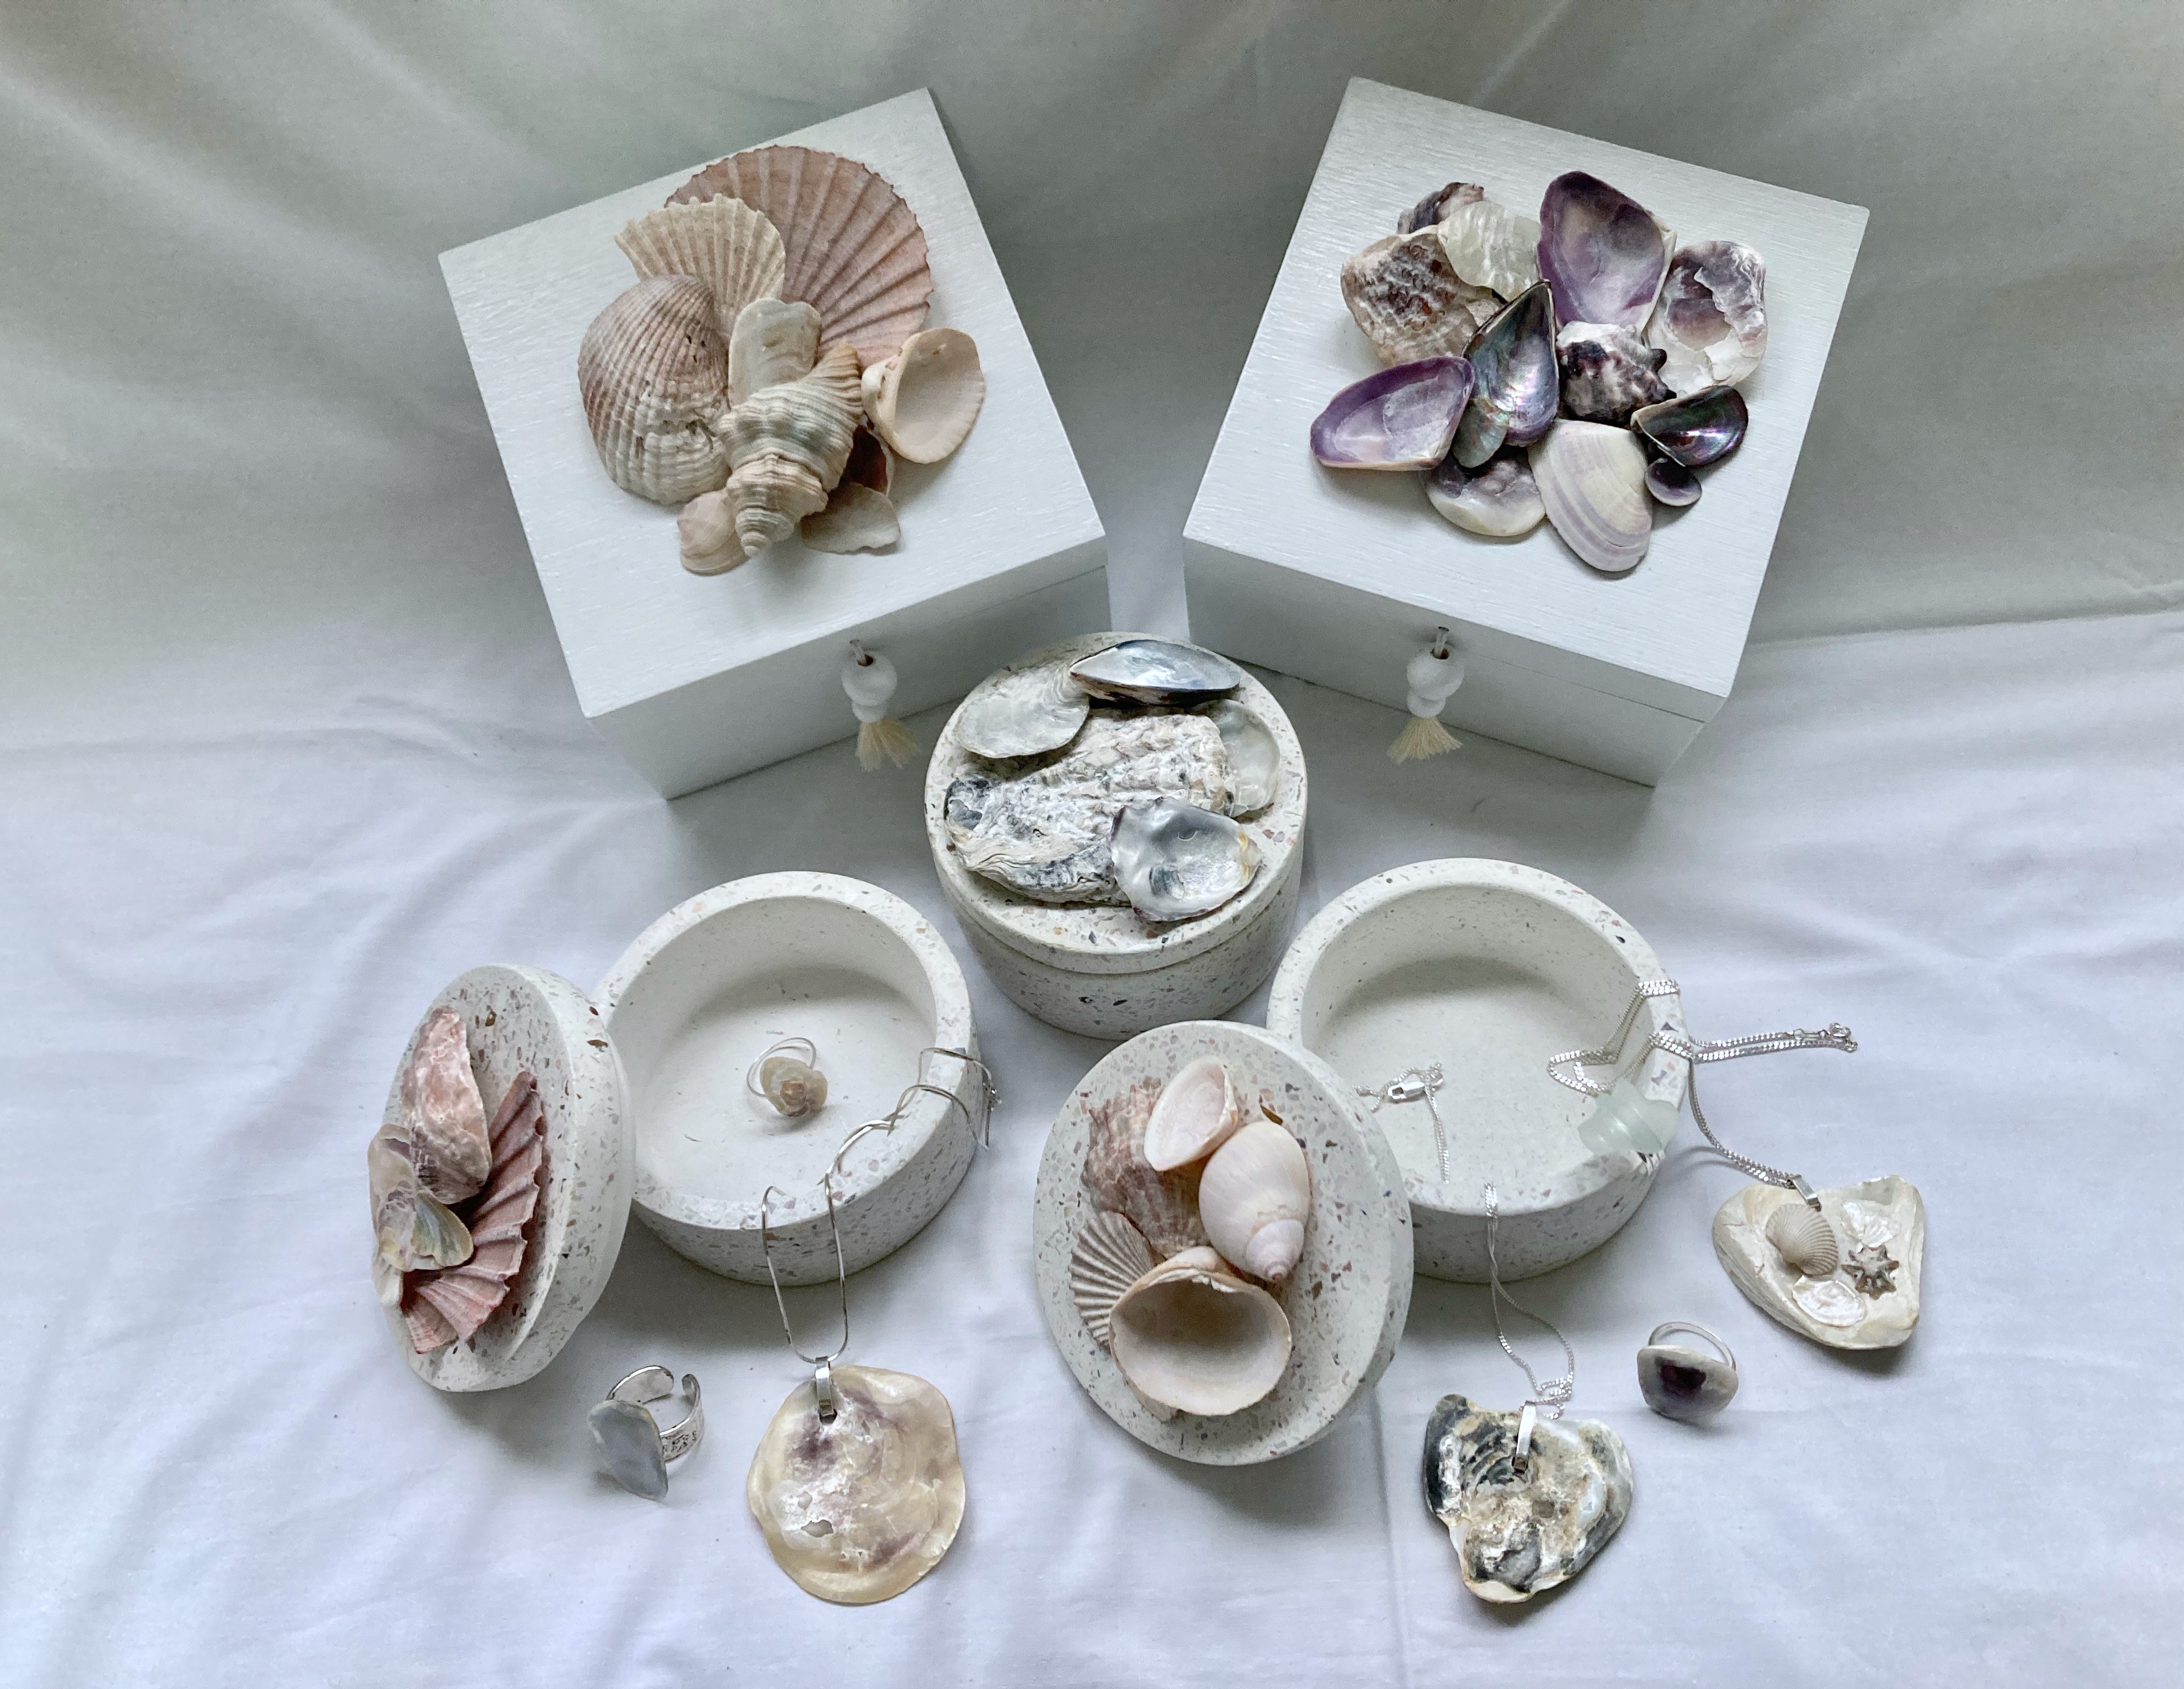 Shell designs by Lisa Knight